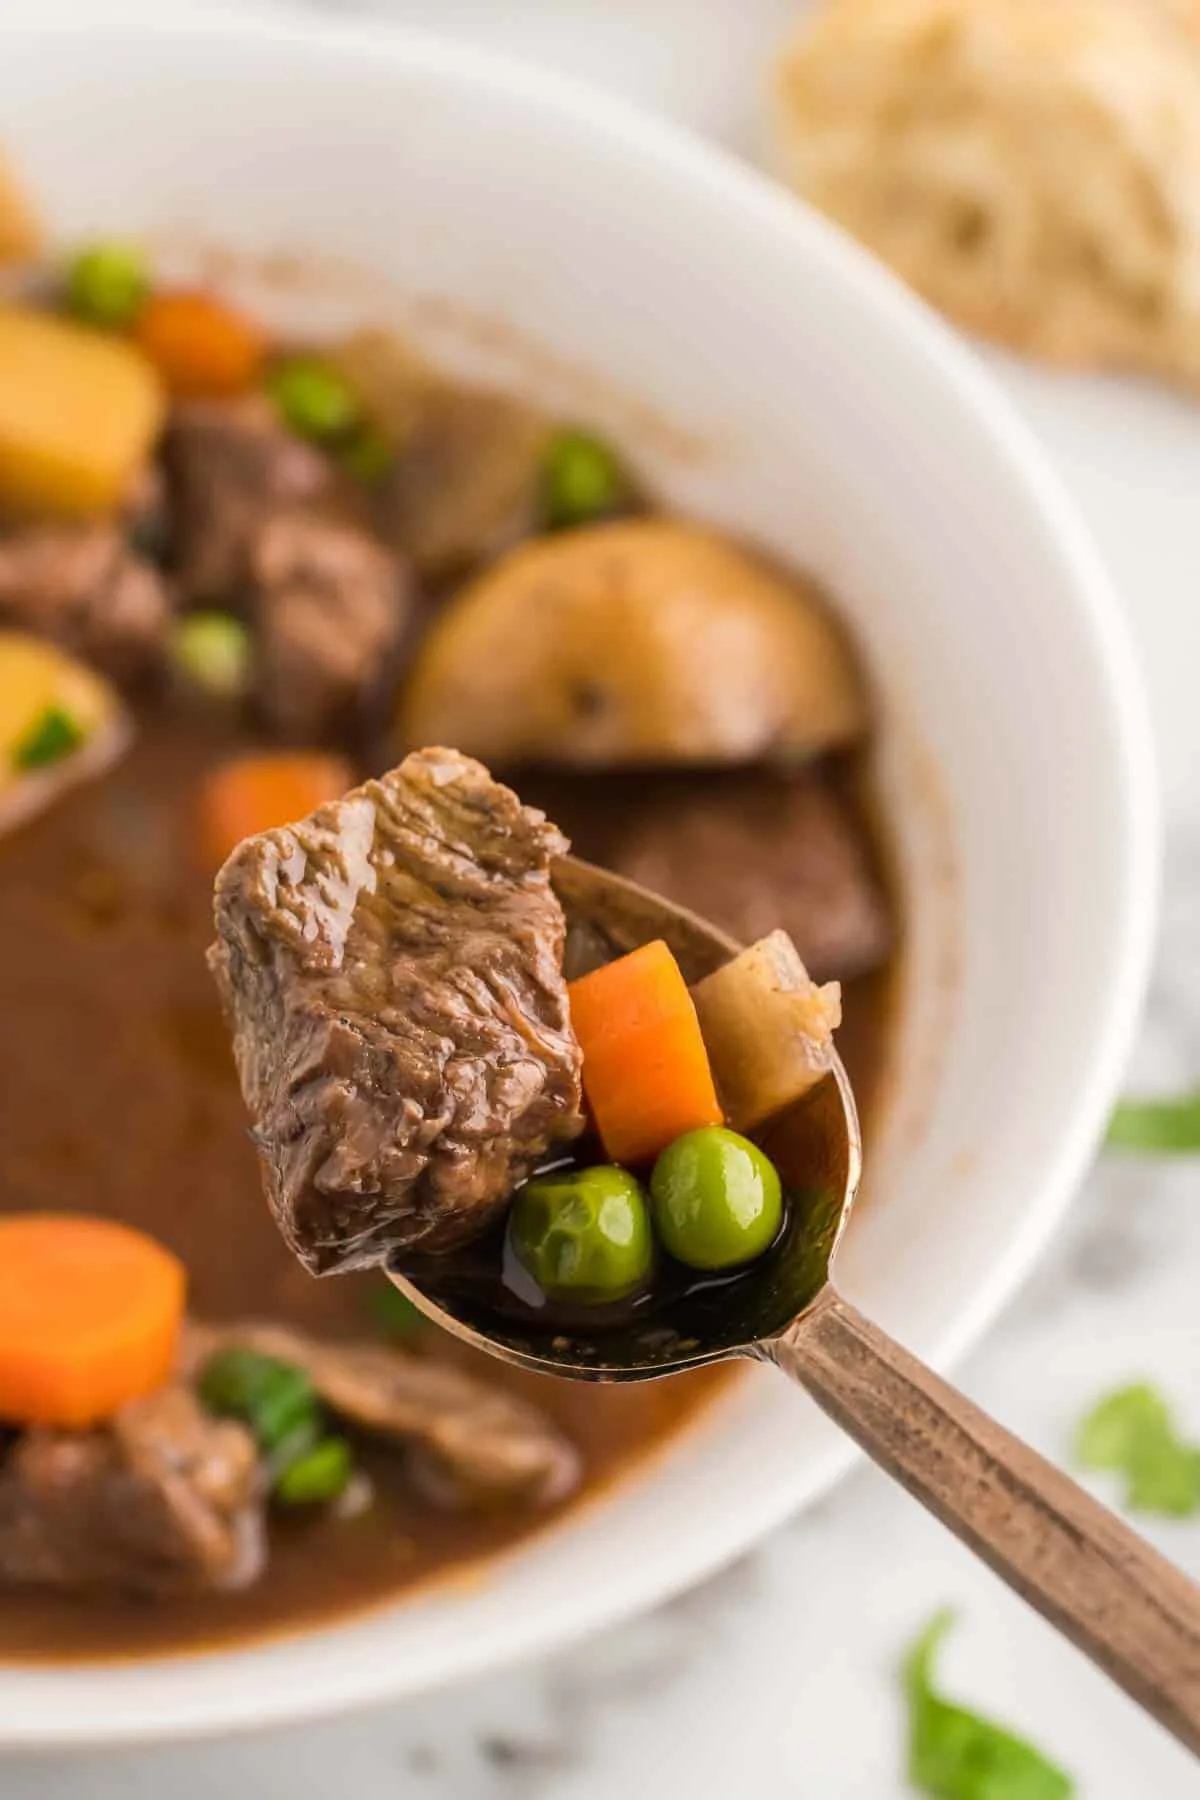 Crock Pot Beef Stew is a hearty slow cooker dish loaded with chunks of beef, potatoes, carrots, onions and peas all in a delicious red wine beef broth.